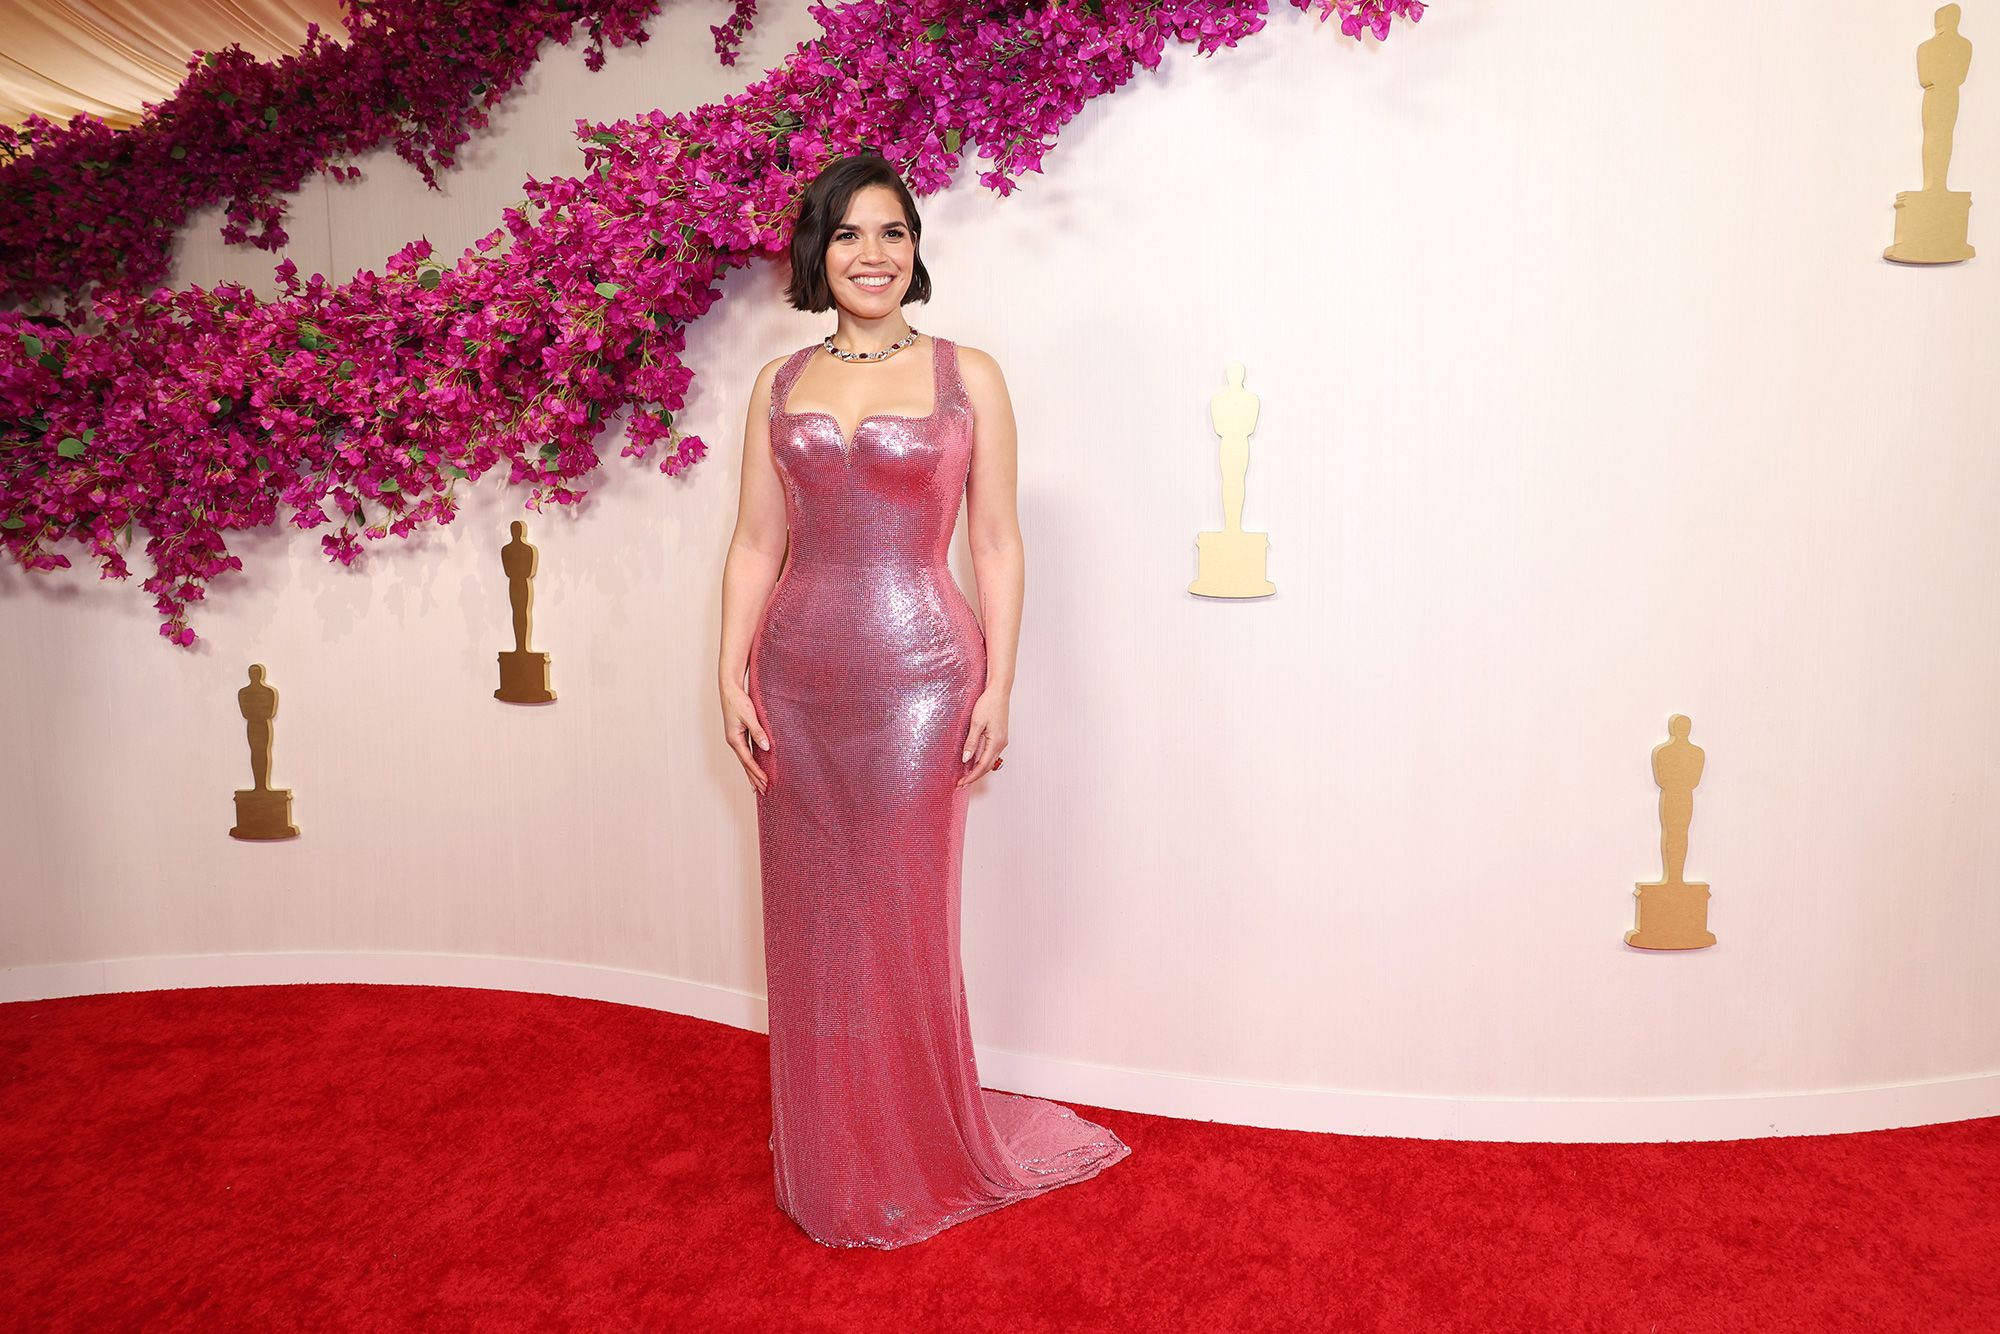 America Ferrera in Versace at the Oscars on March 10.